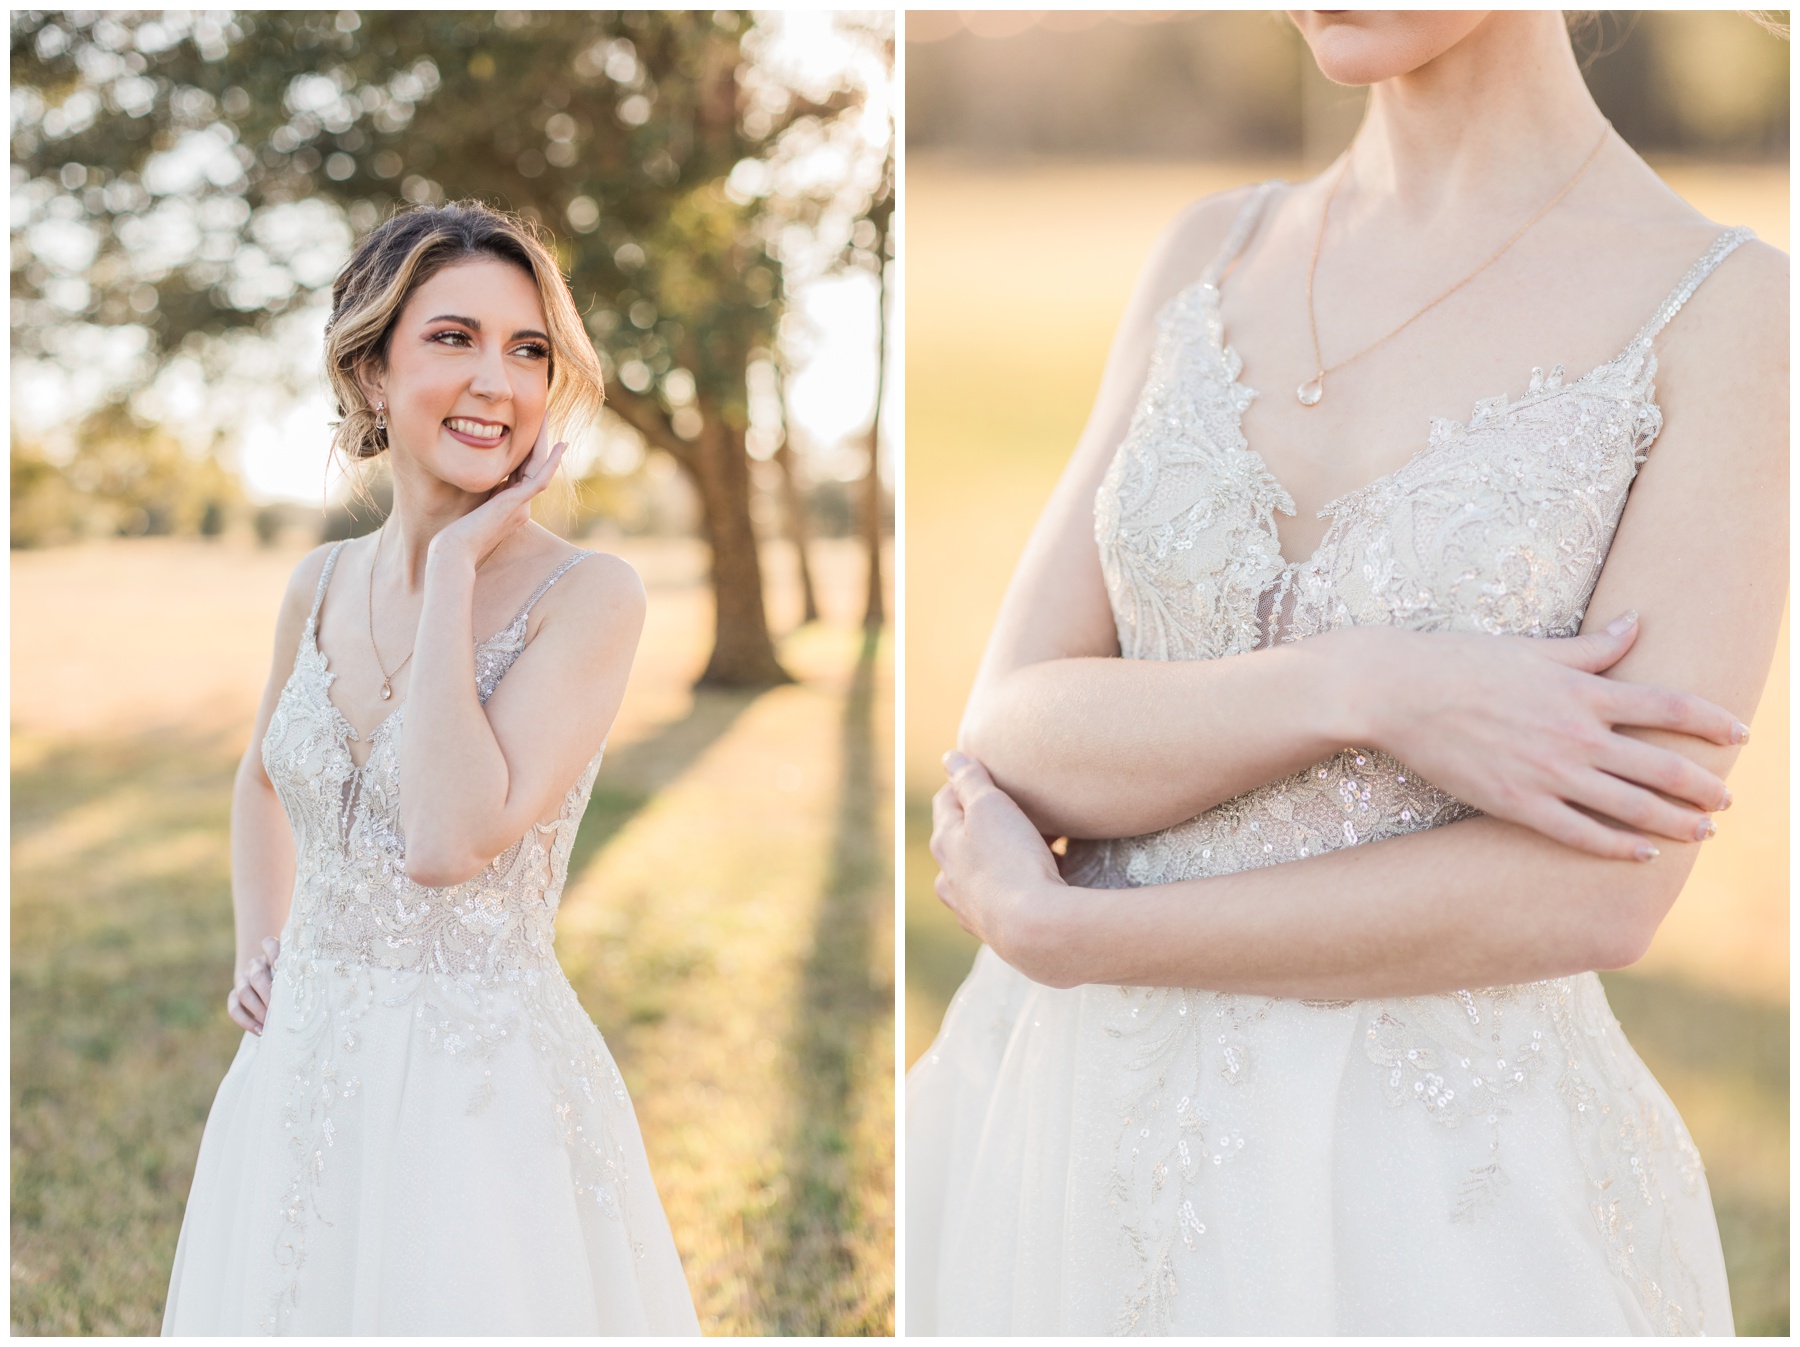 Bride in a tulle wedding gown featuring a glittery skirt and a beaded bodice